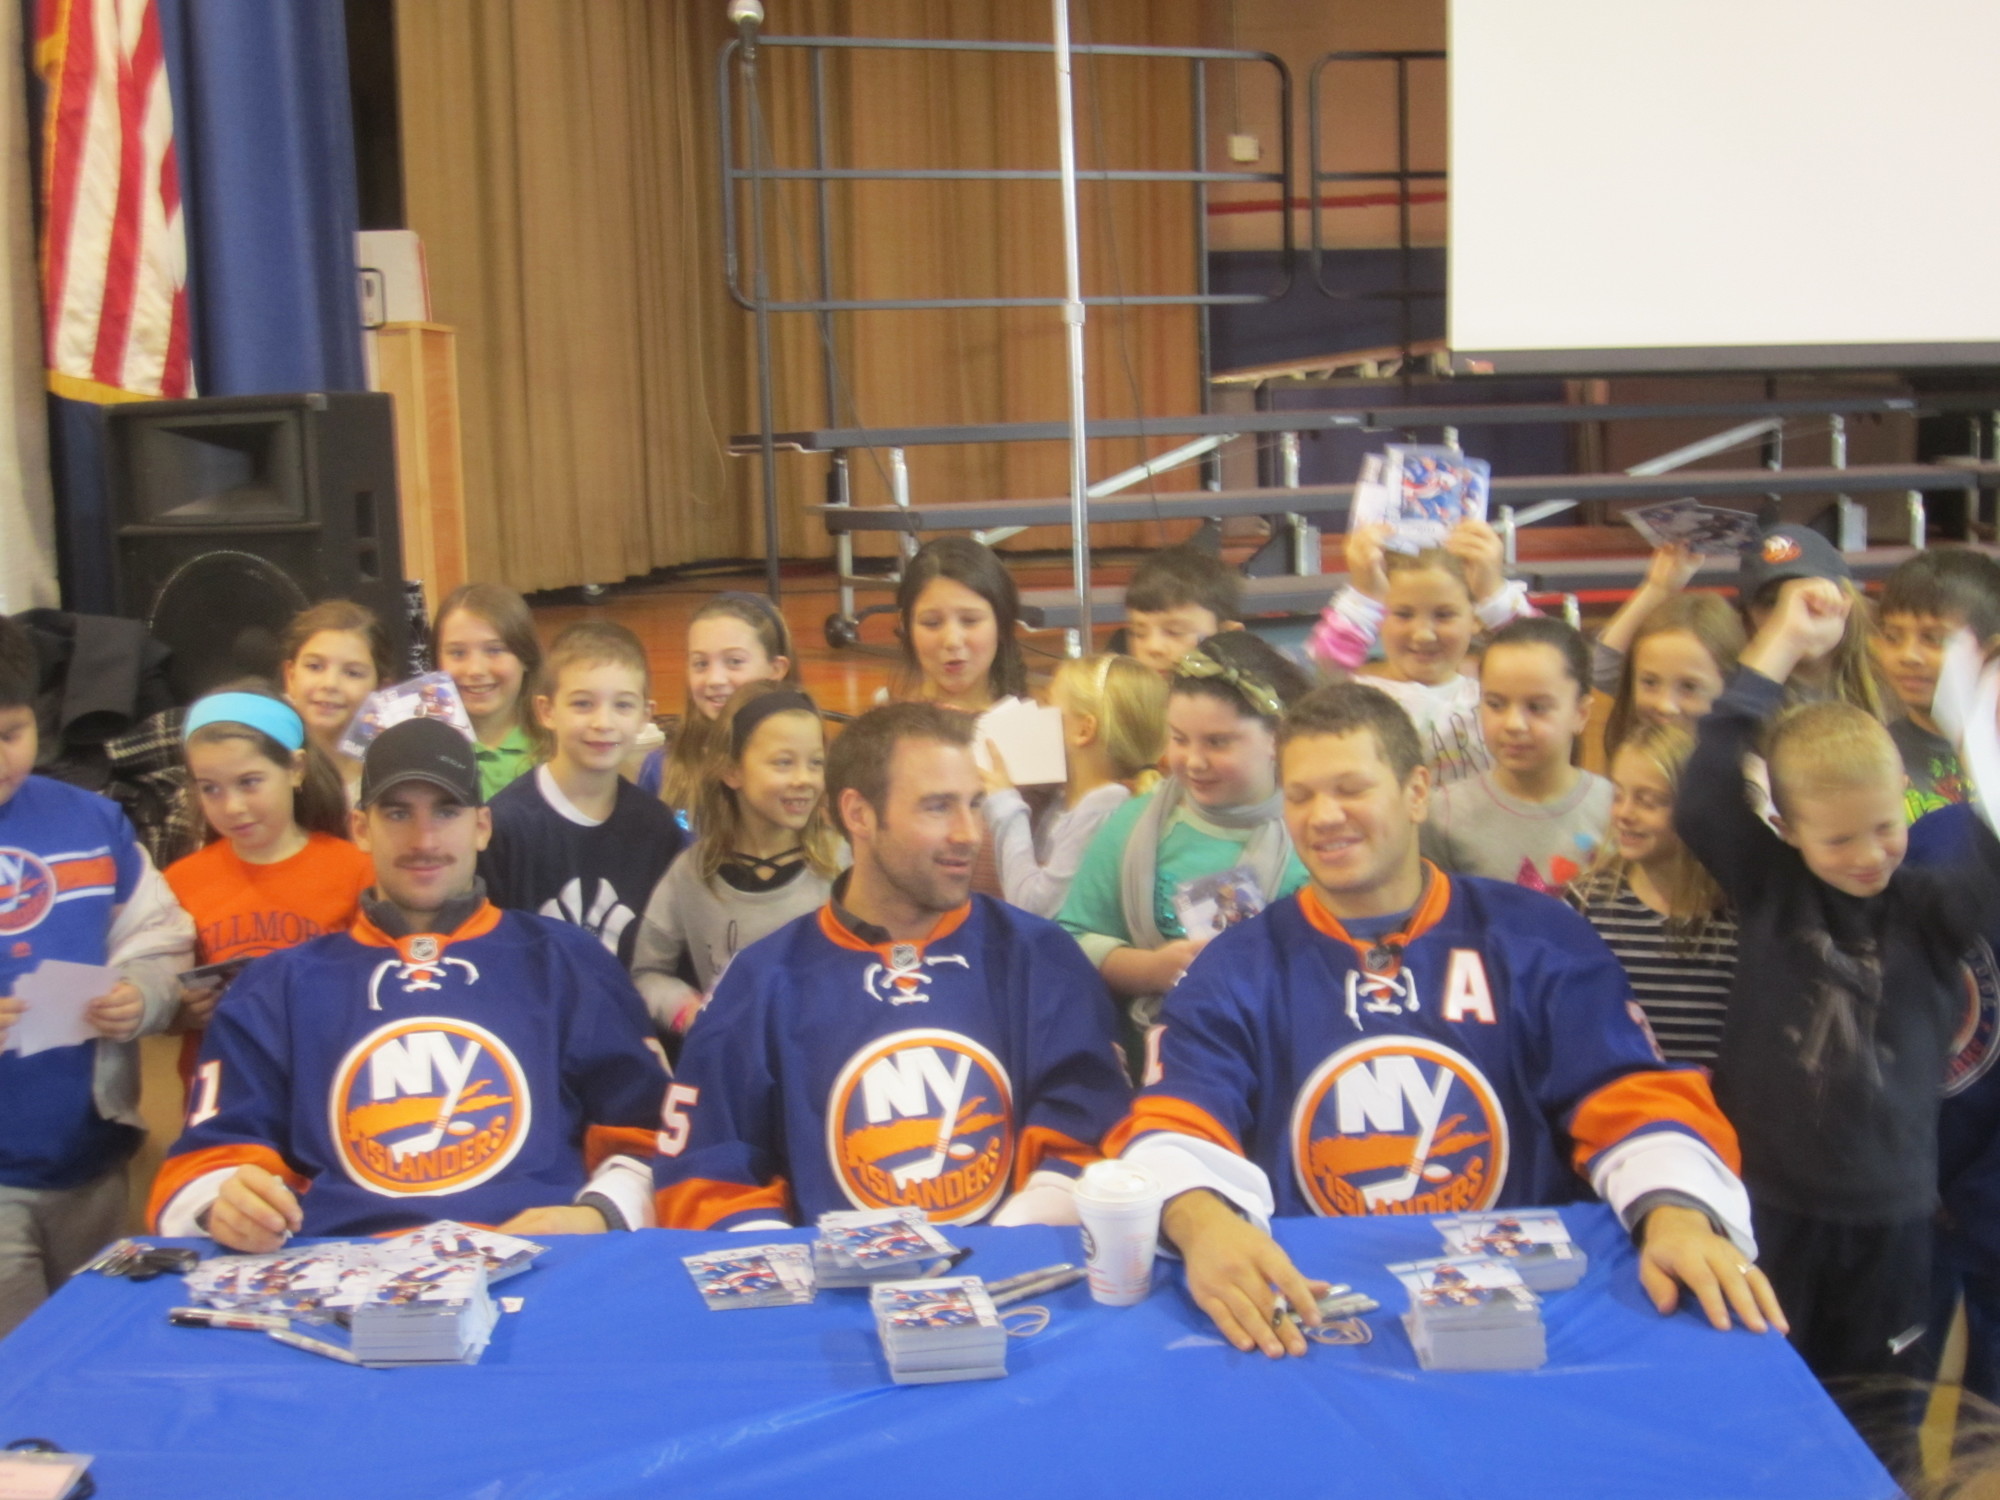 The Islanders stars posed with students.